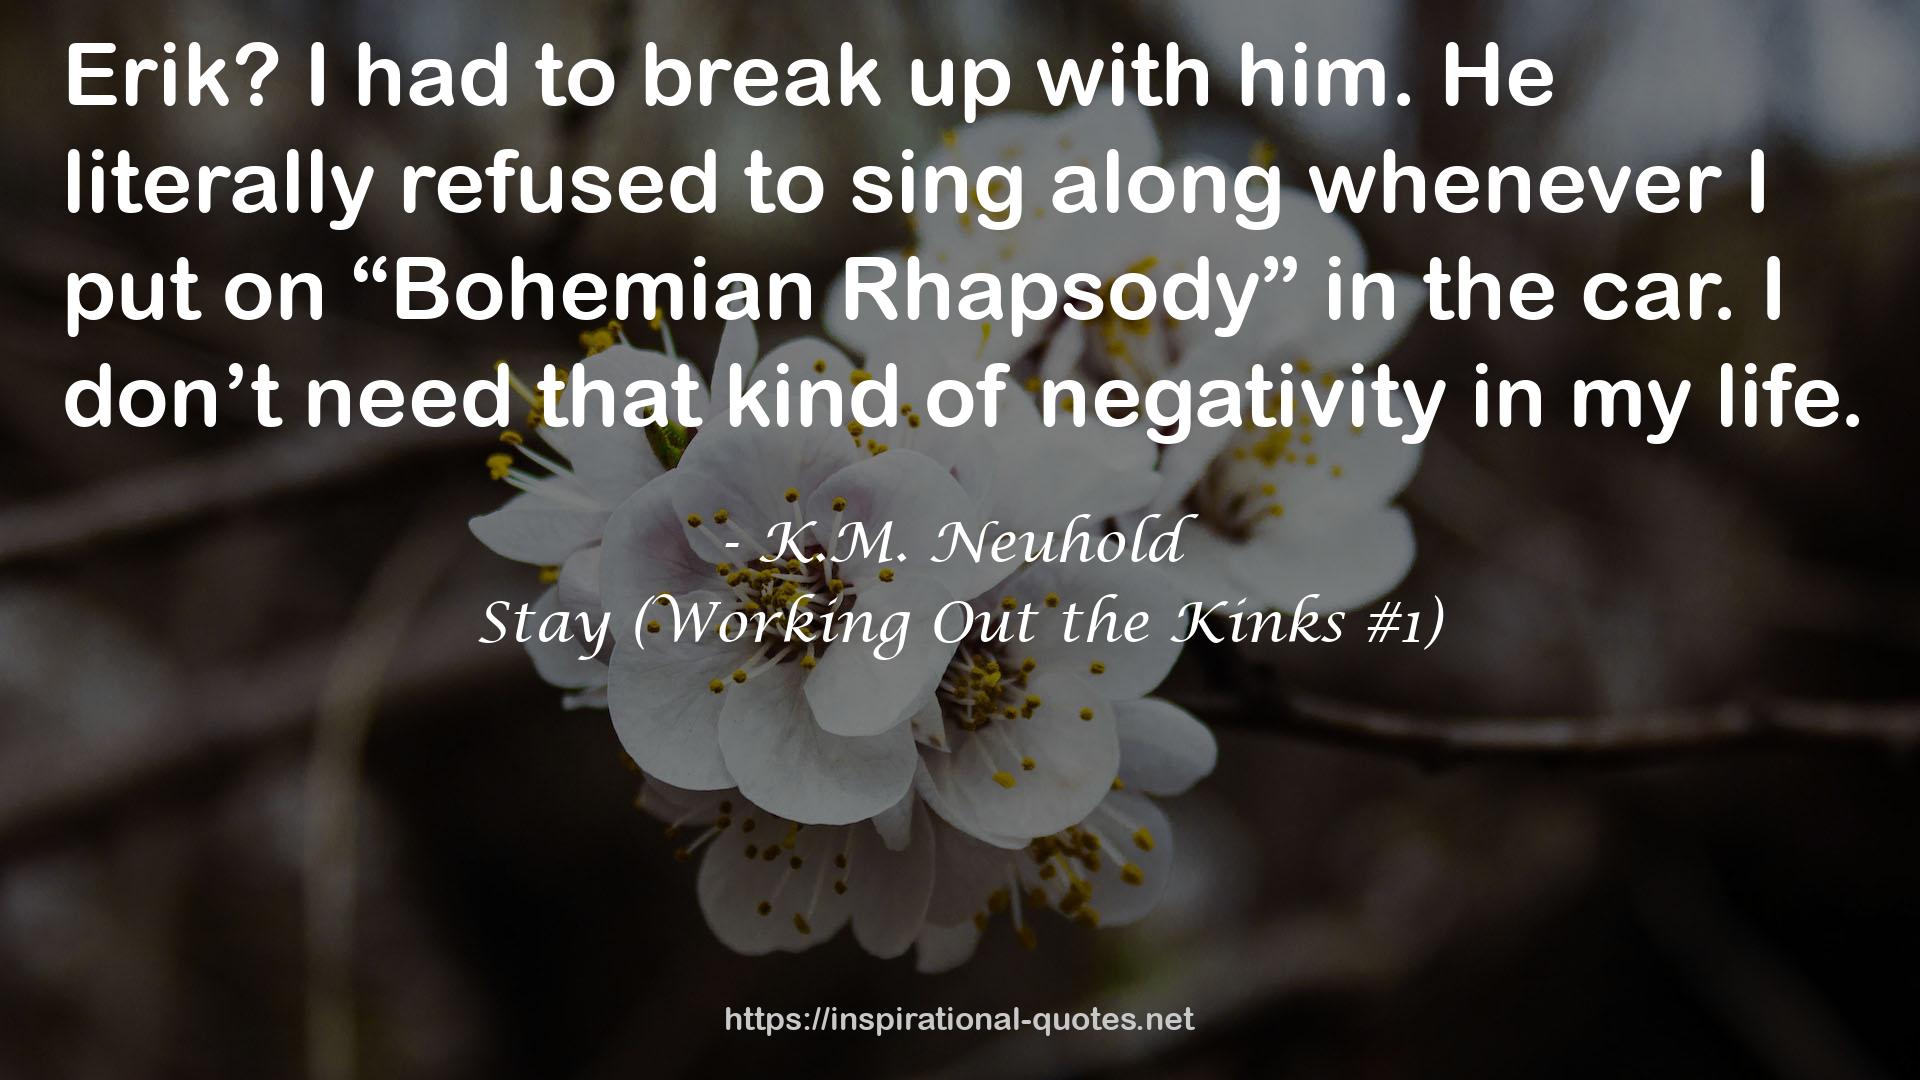 Stay (Working Out the Kinks #1) QUOTES